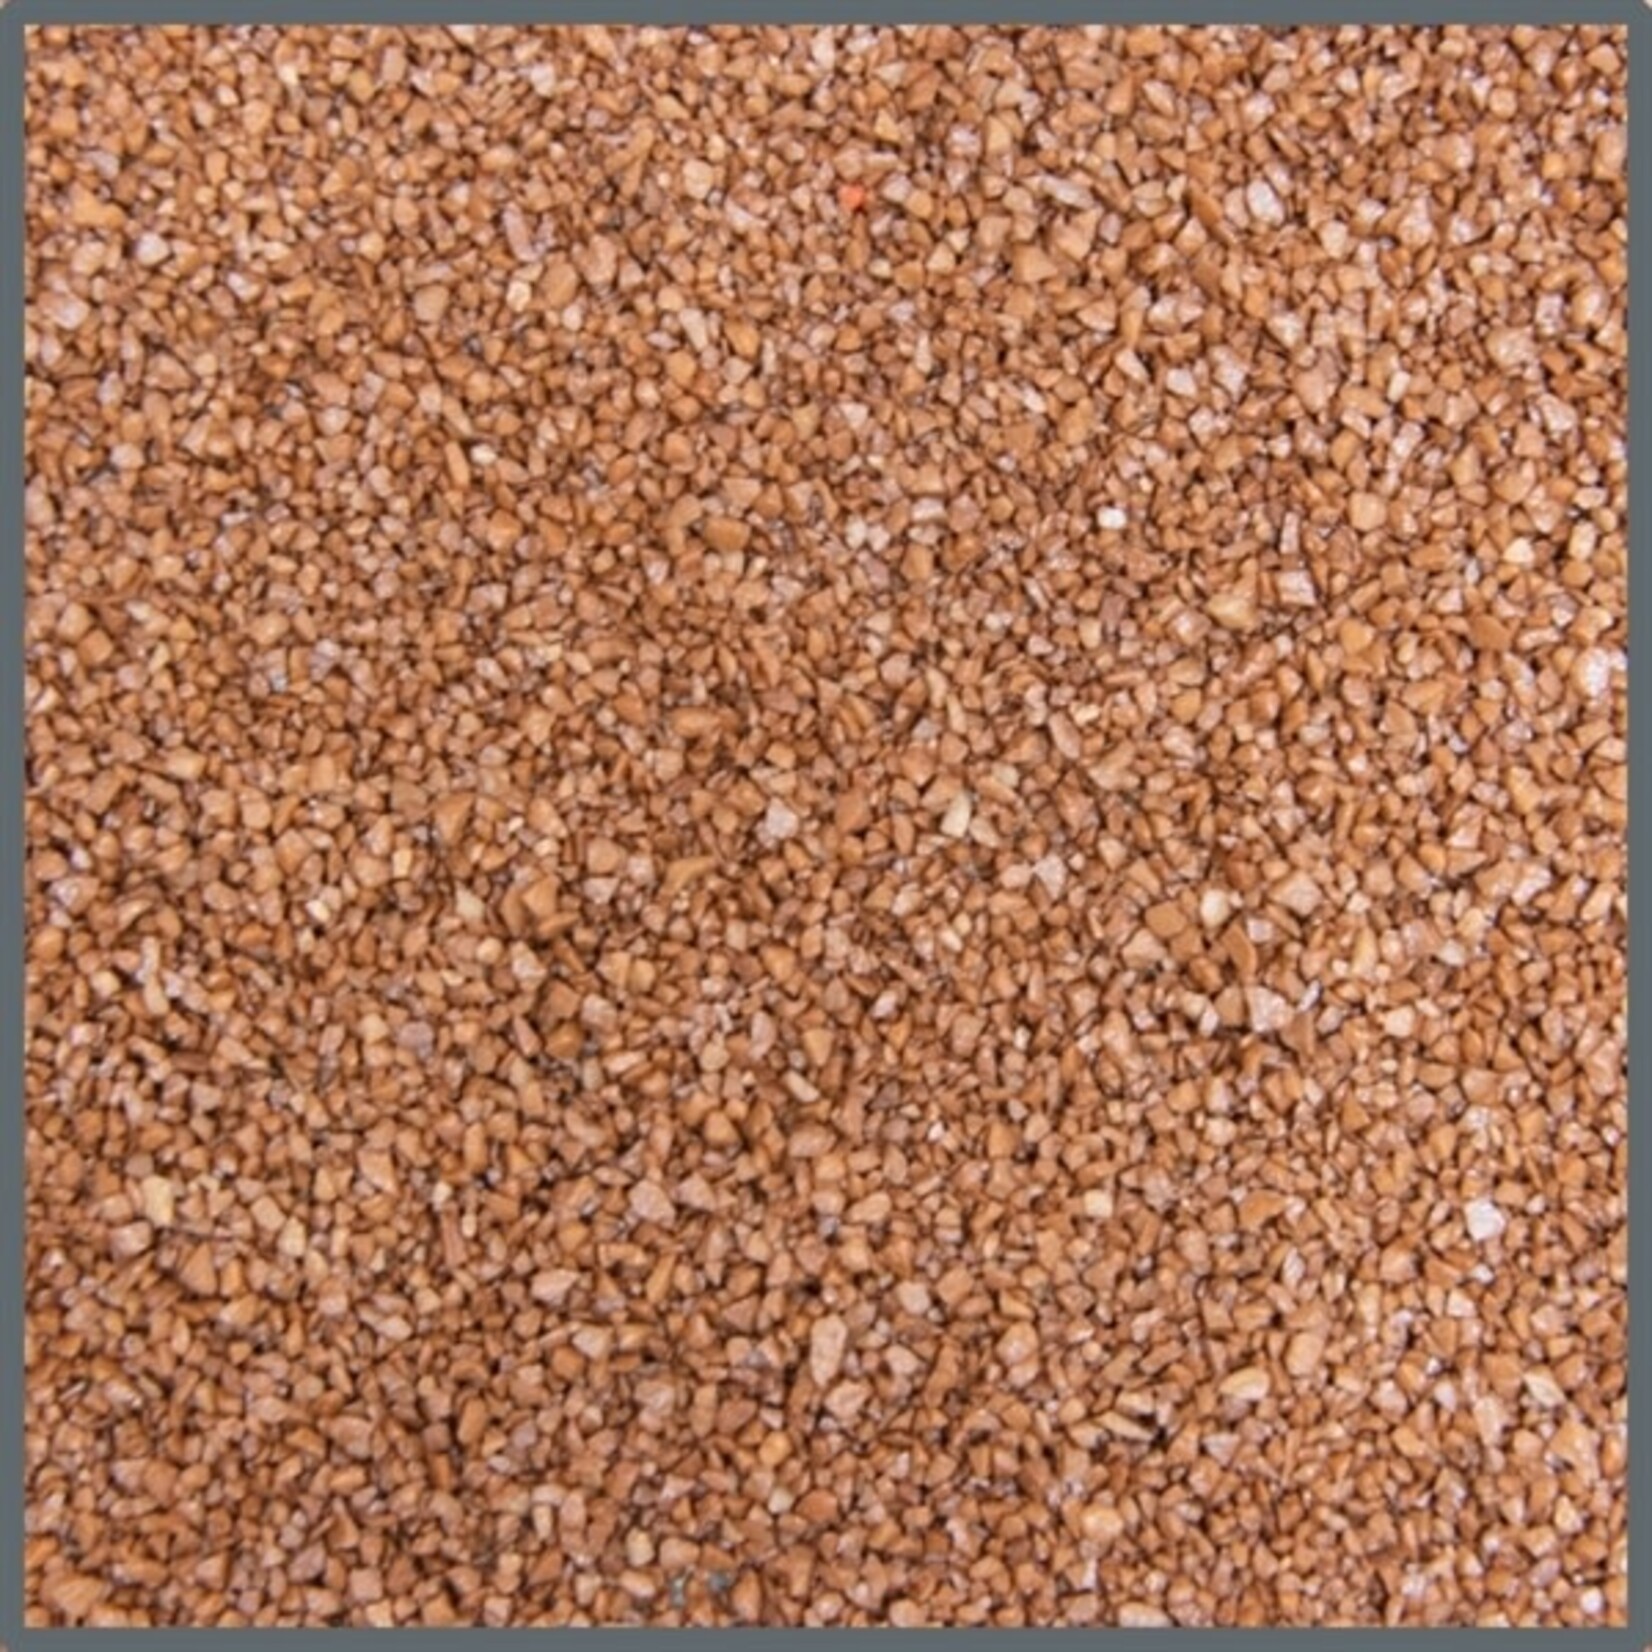 Dupla DUPLA GROUND COLOUR BROWN EARTH 0.5-1.4 MM 5 KG